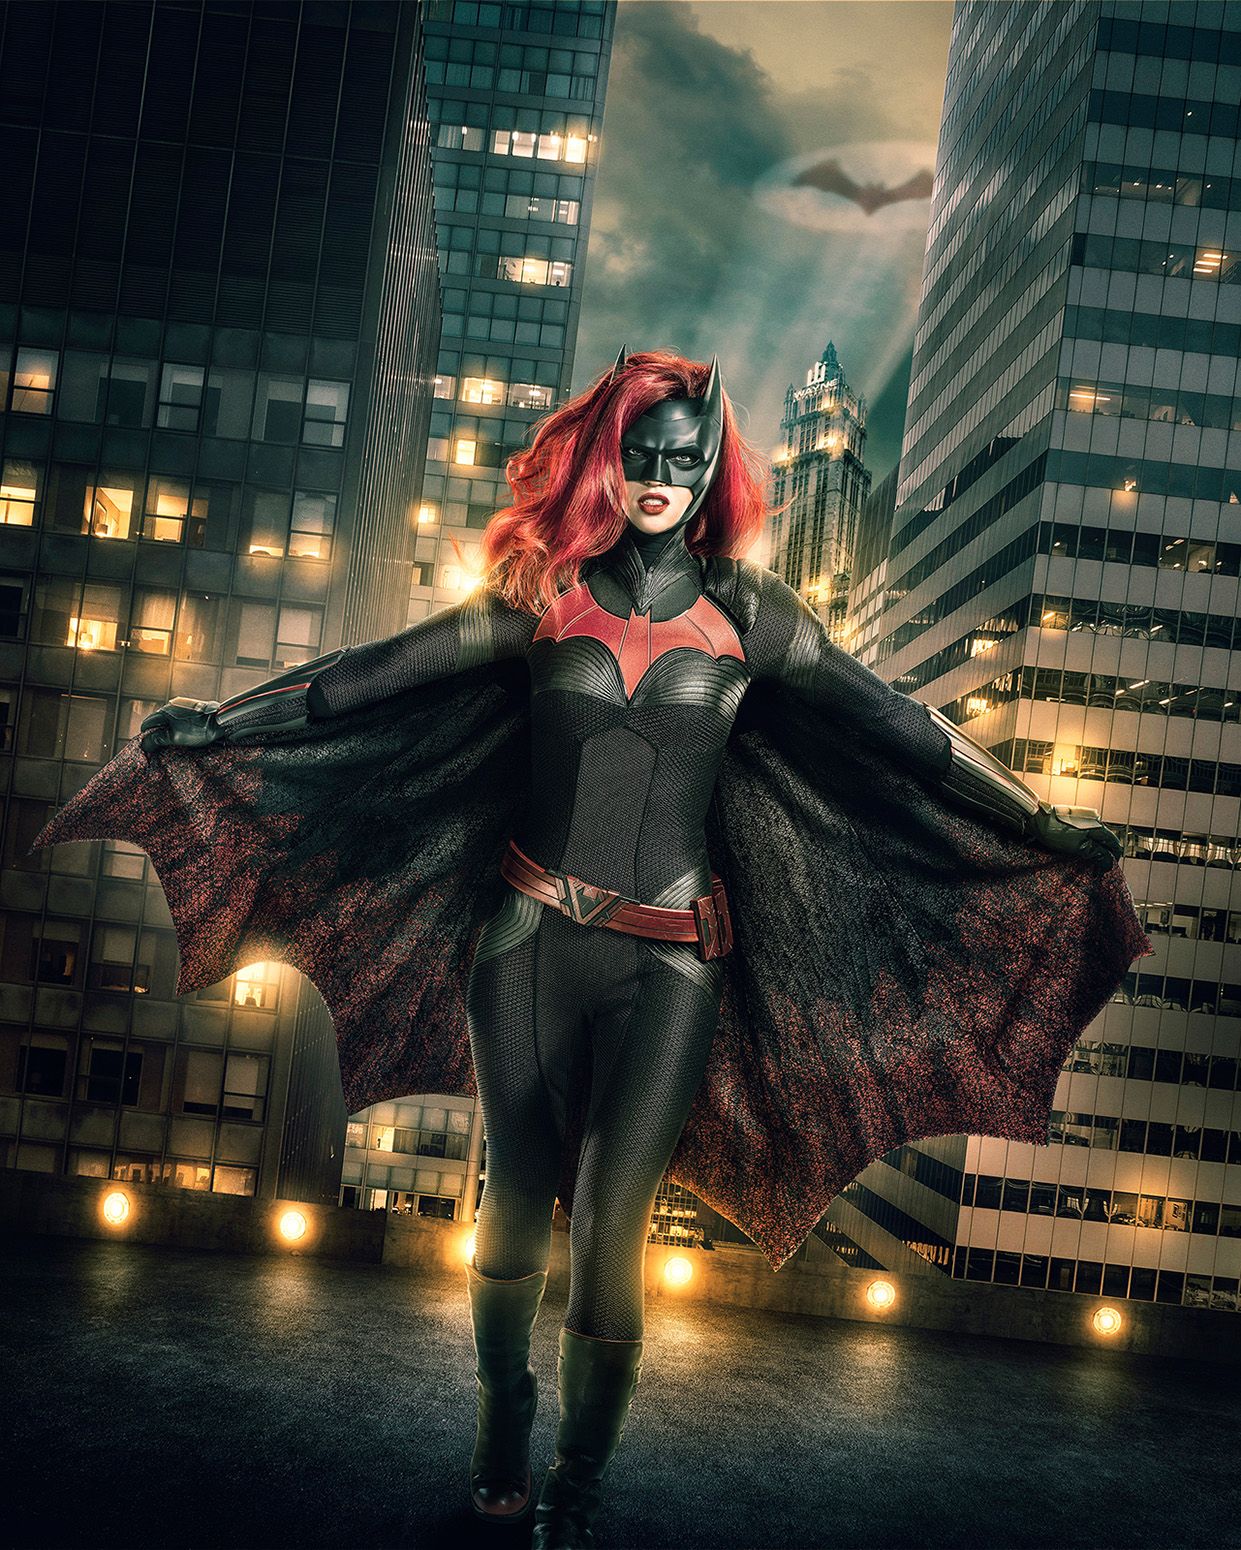 The Arrowverse's Ruby Rose suits up as Batwoman in first-look photo.